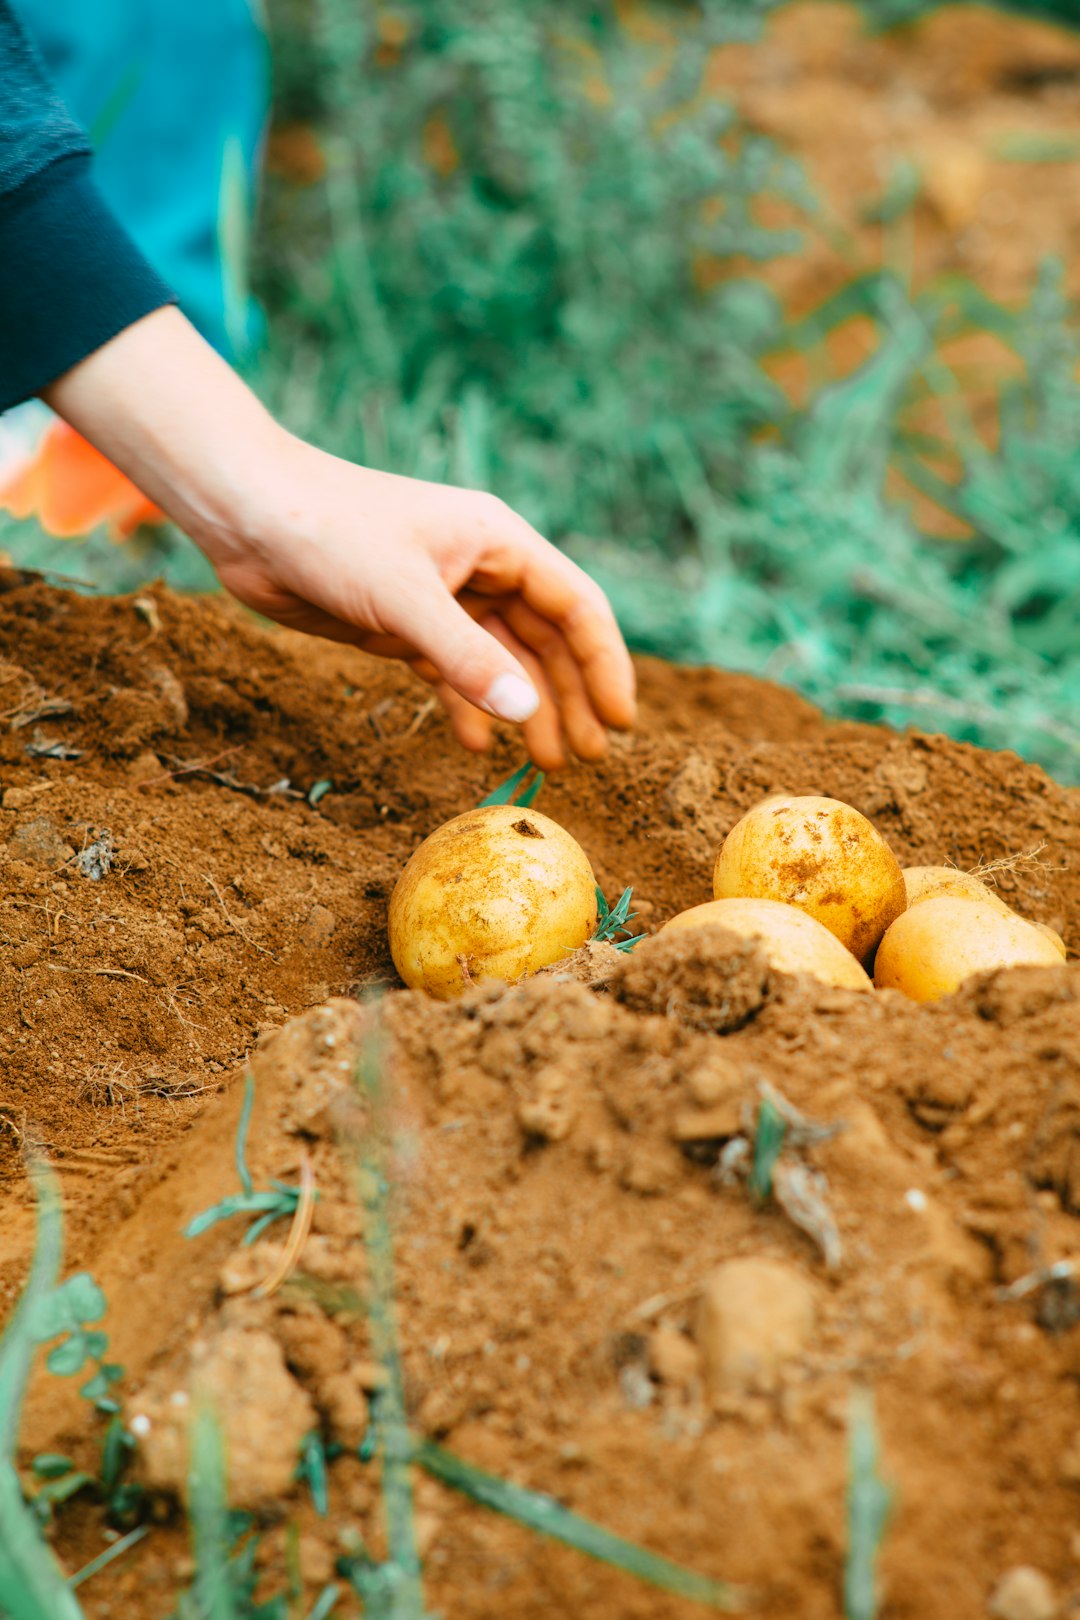 transplante jungleboogie, soil, person holding two yellow round fruits